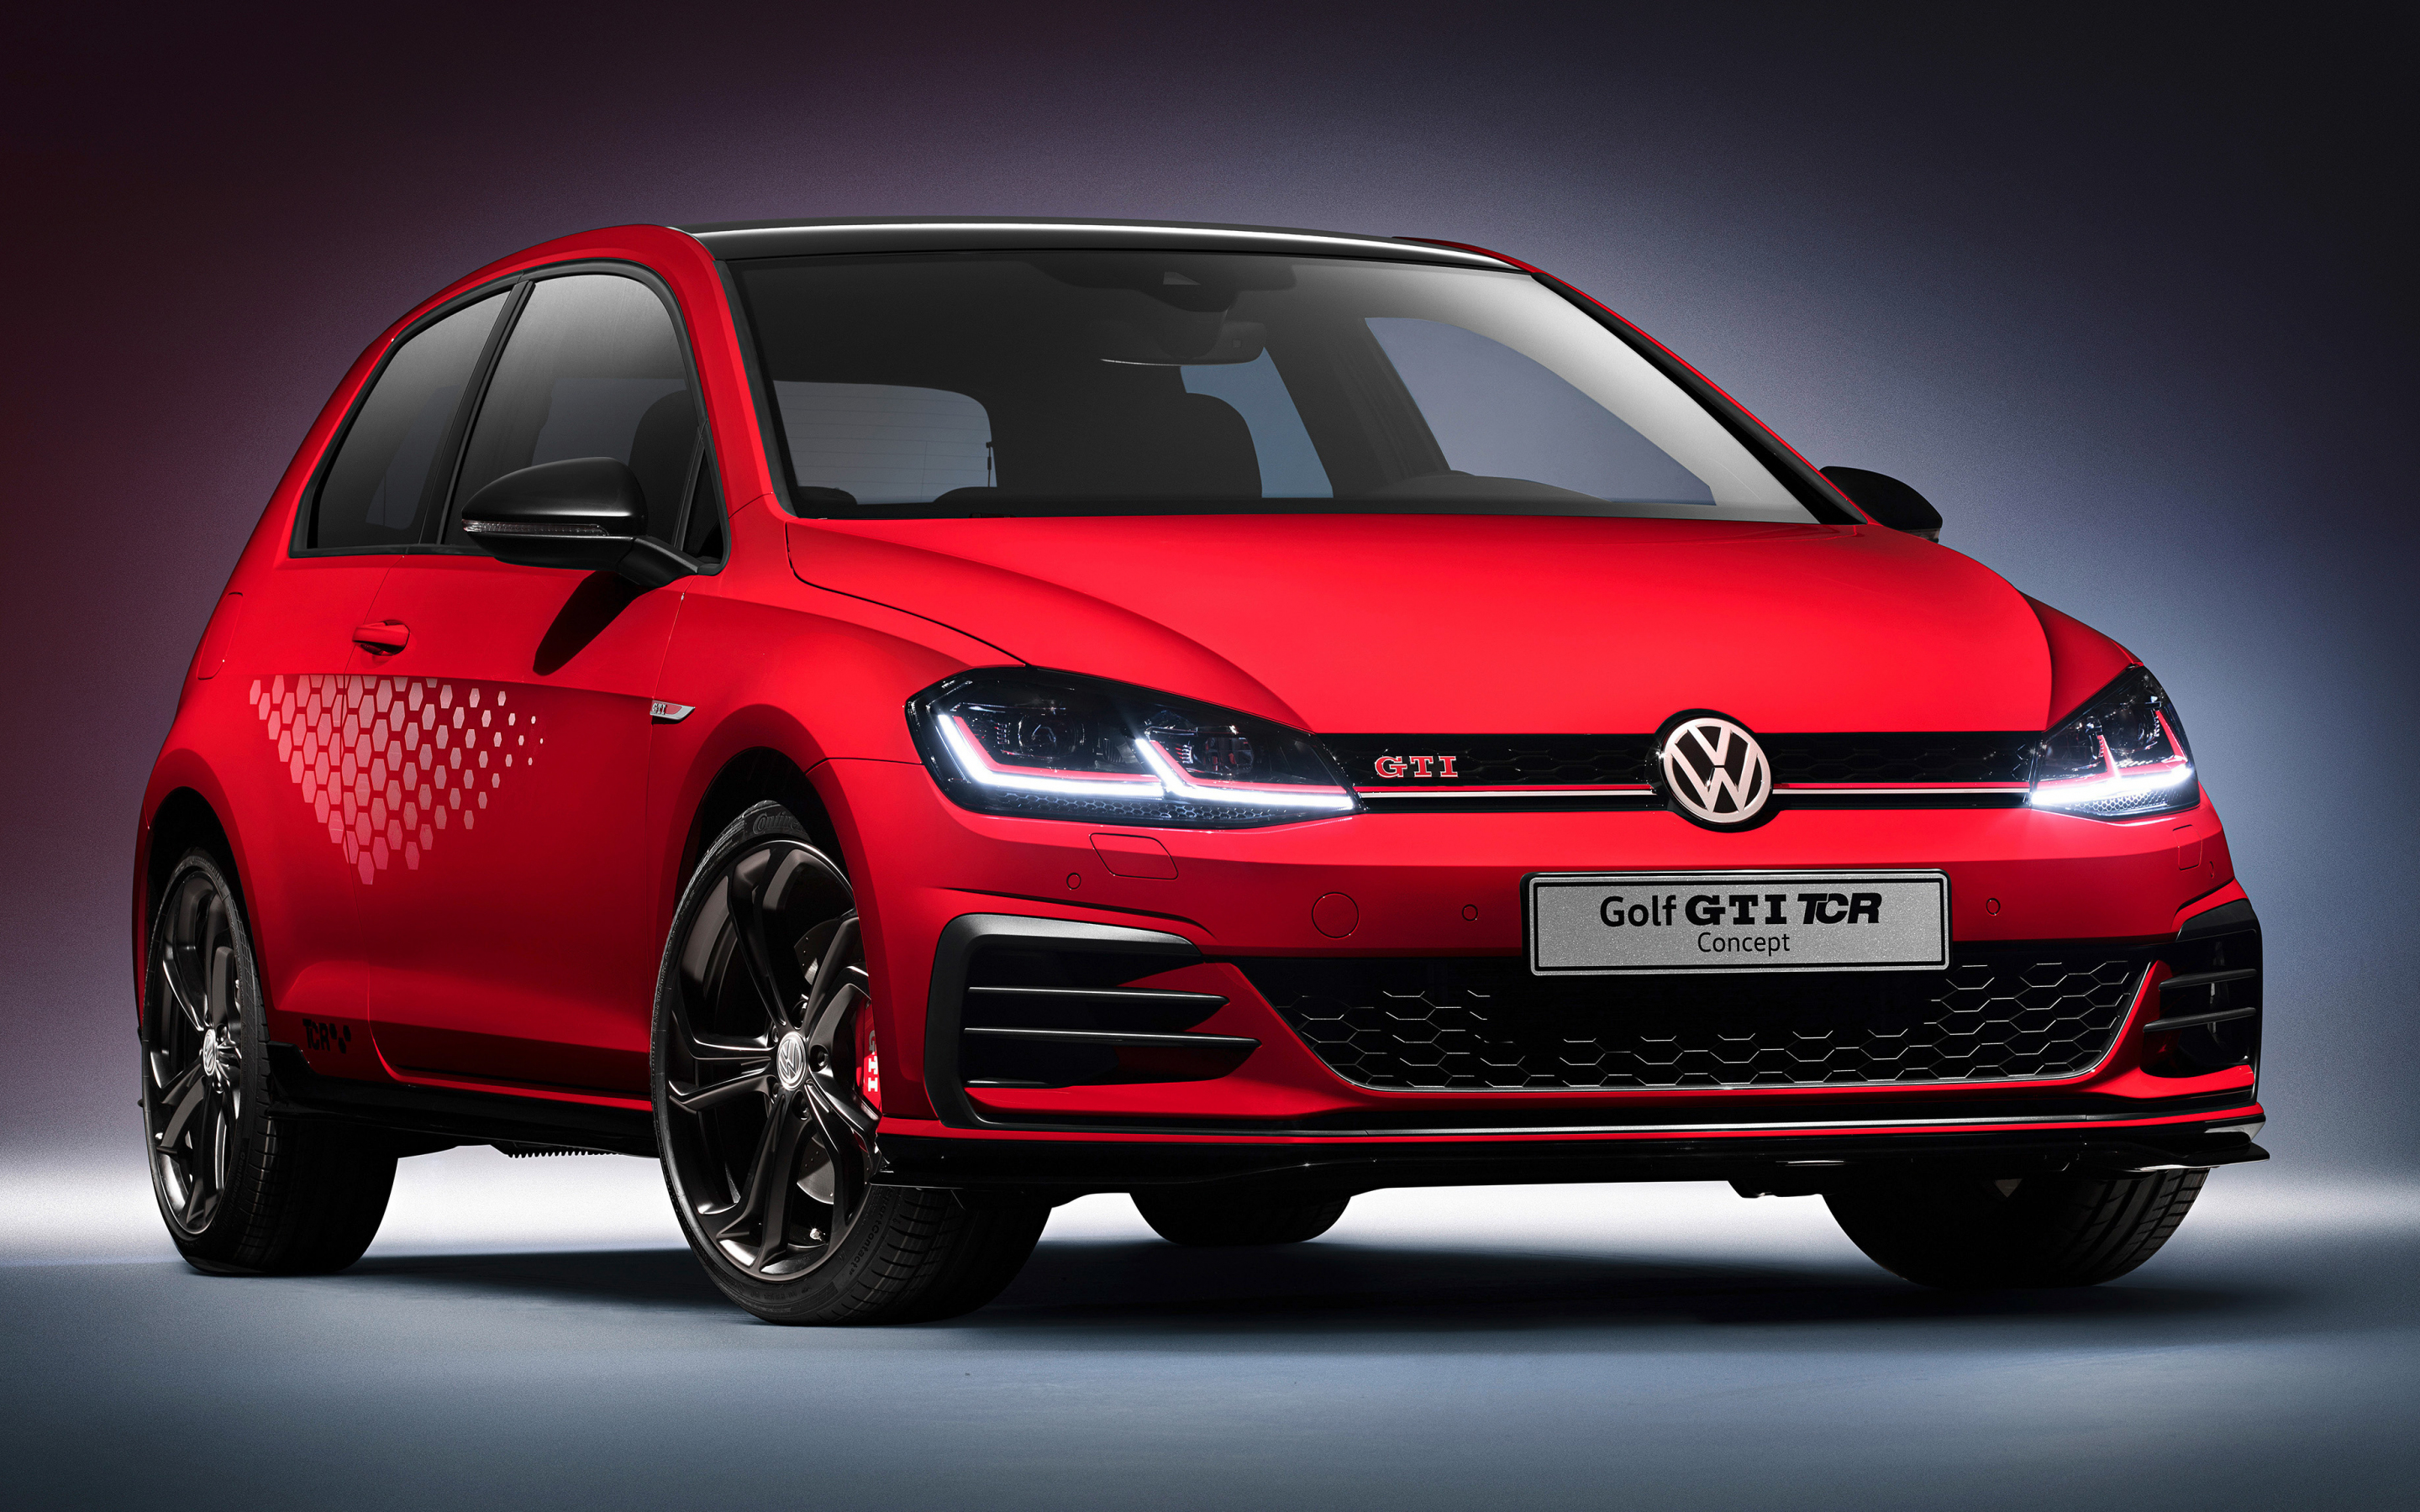 Volkswagen Golf GTI TCR Concept, red, compact car, 2018, 2880x1800 wallpaper